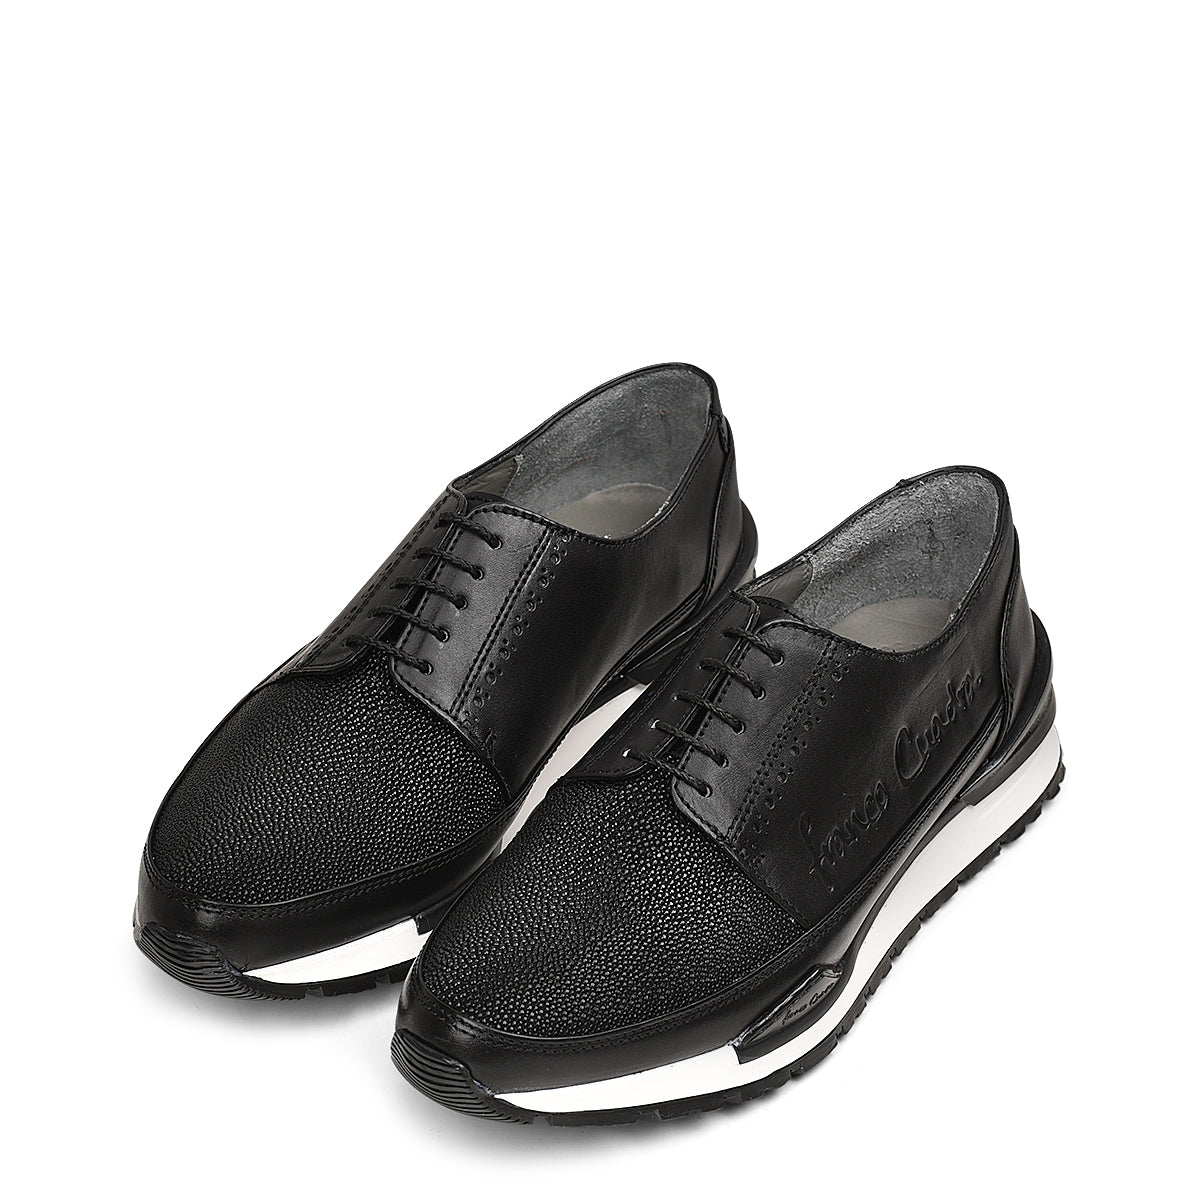 black exotic leather sneakers, bovine leather and stingray leather